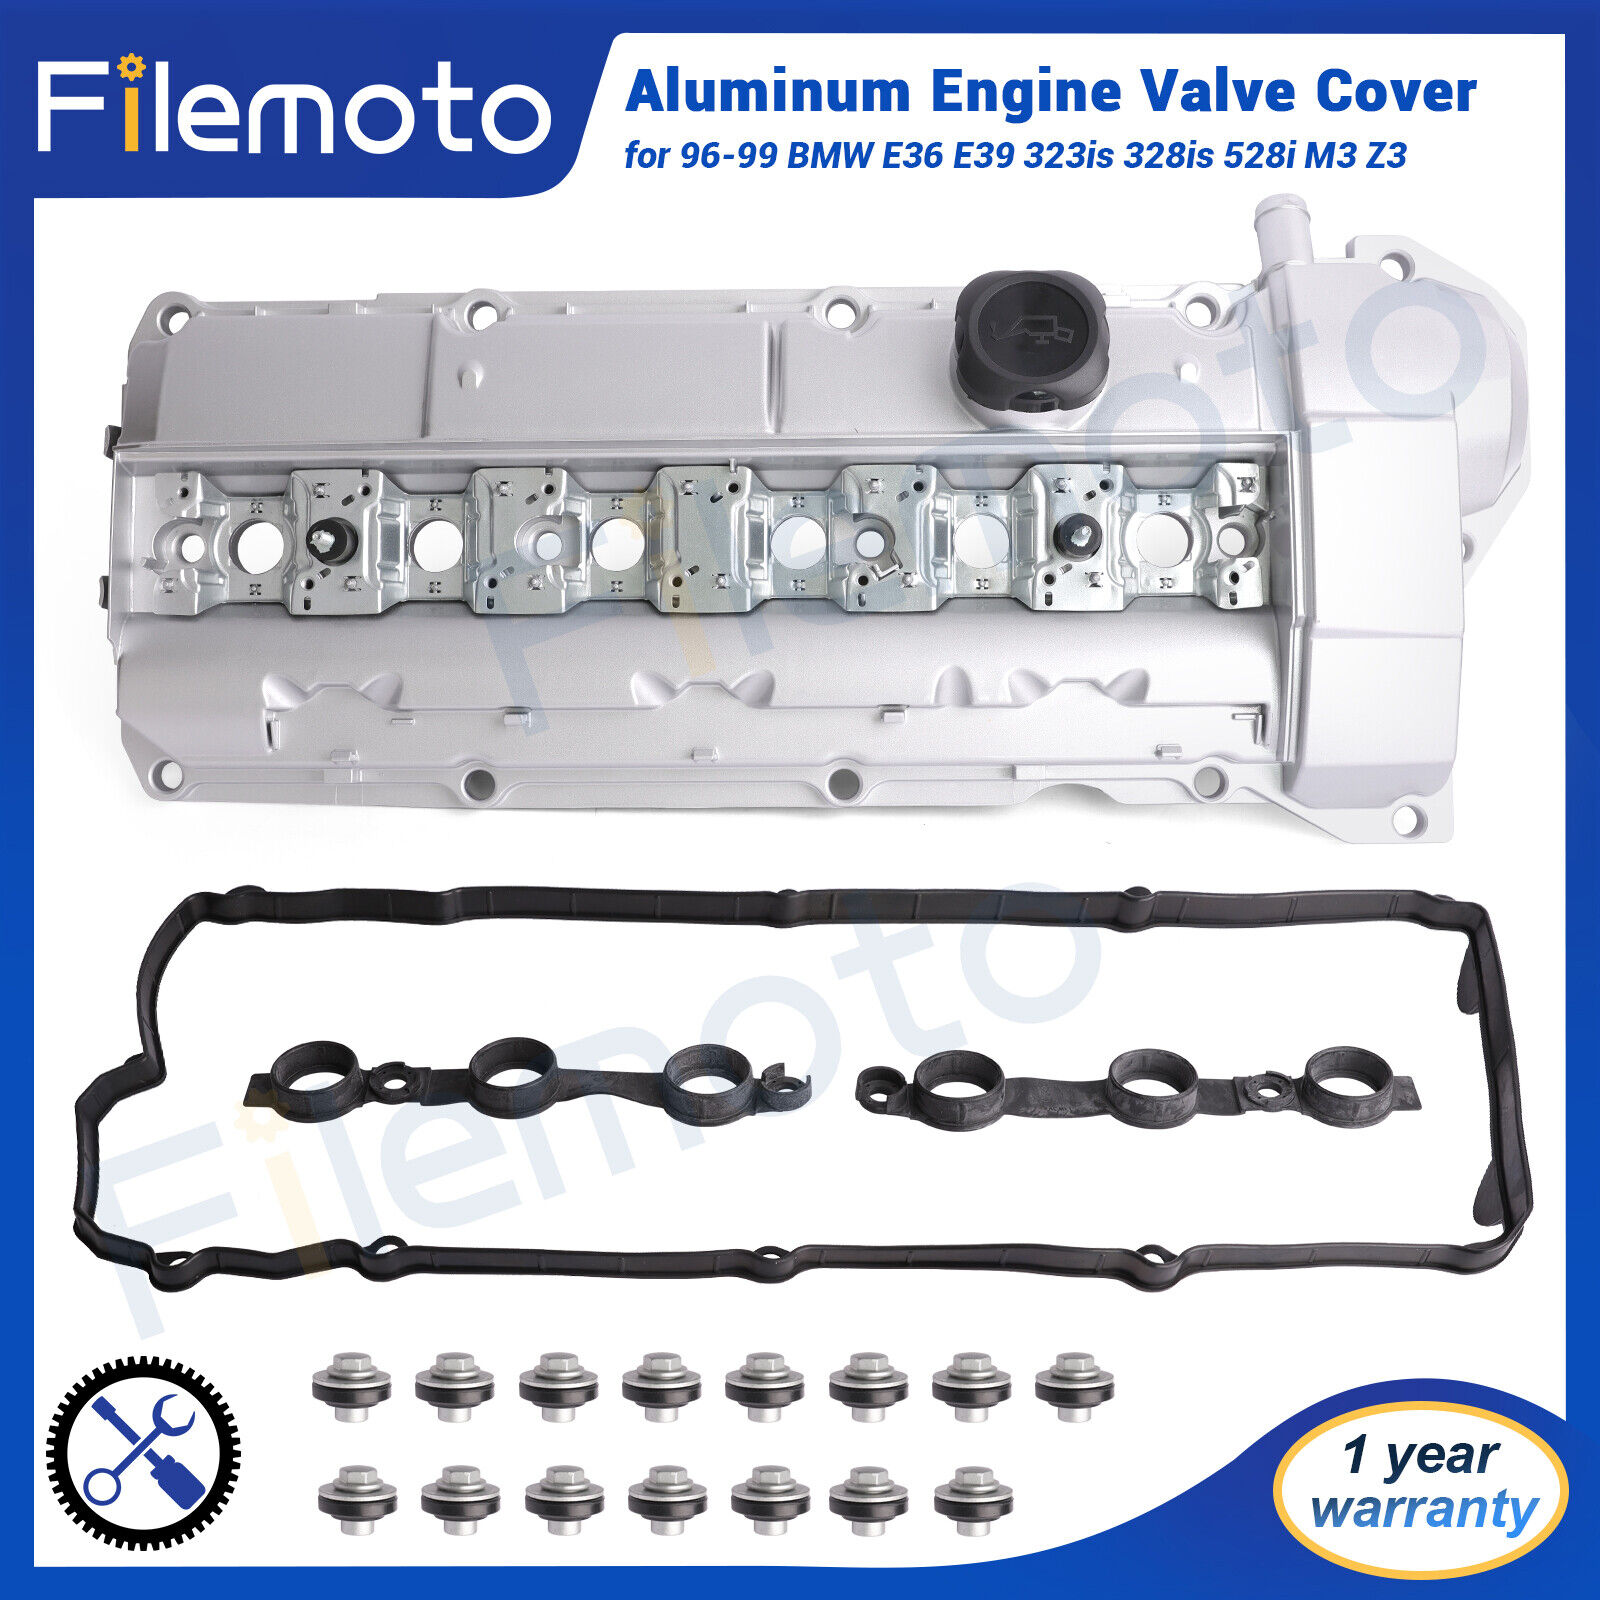 Aluminum Valve Cover for 96-99 BMW E36 E39 323is 328is 528i M3 Z3 11121703341